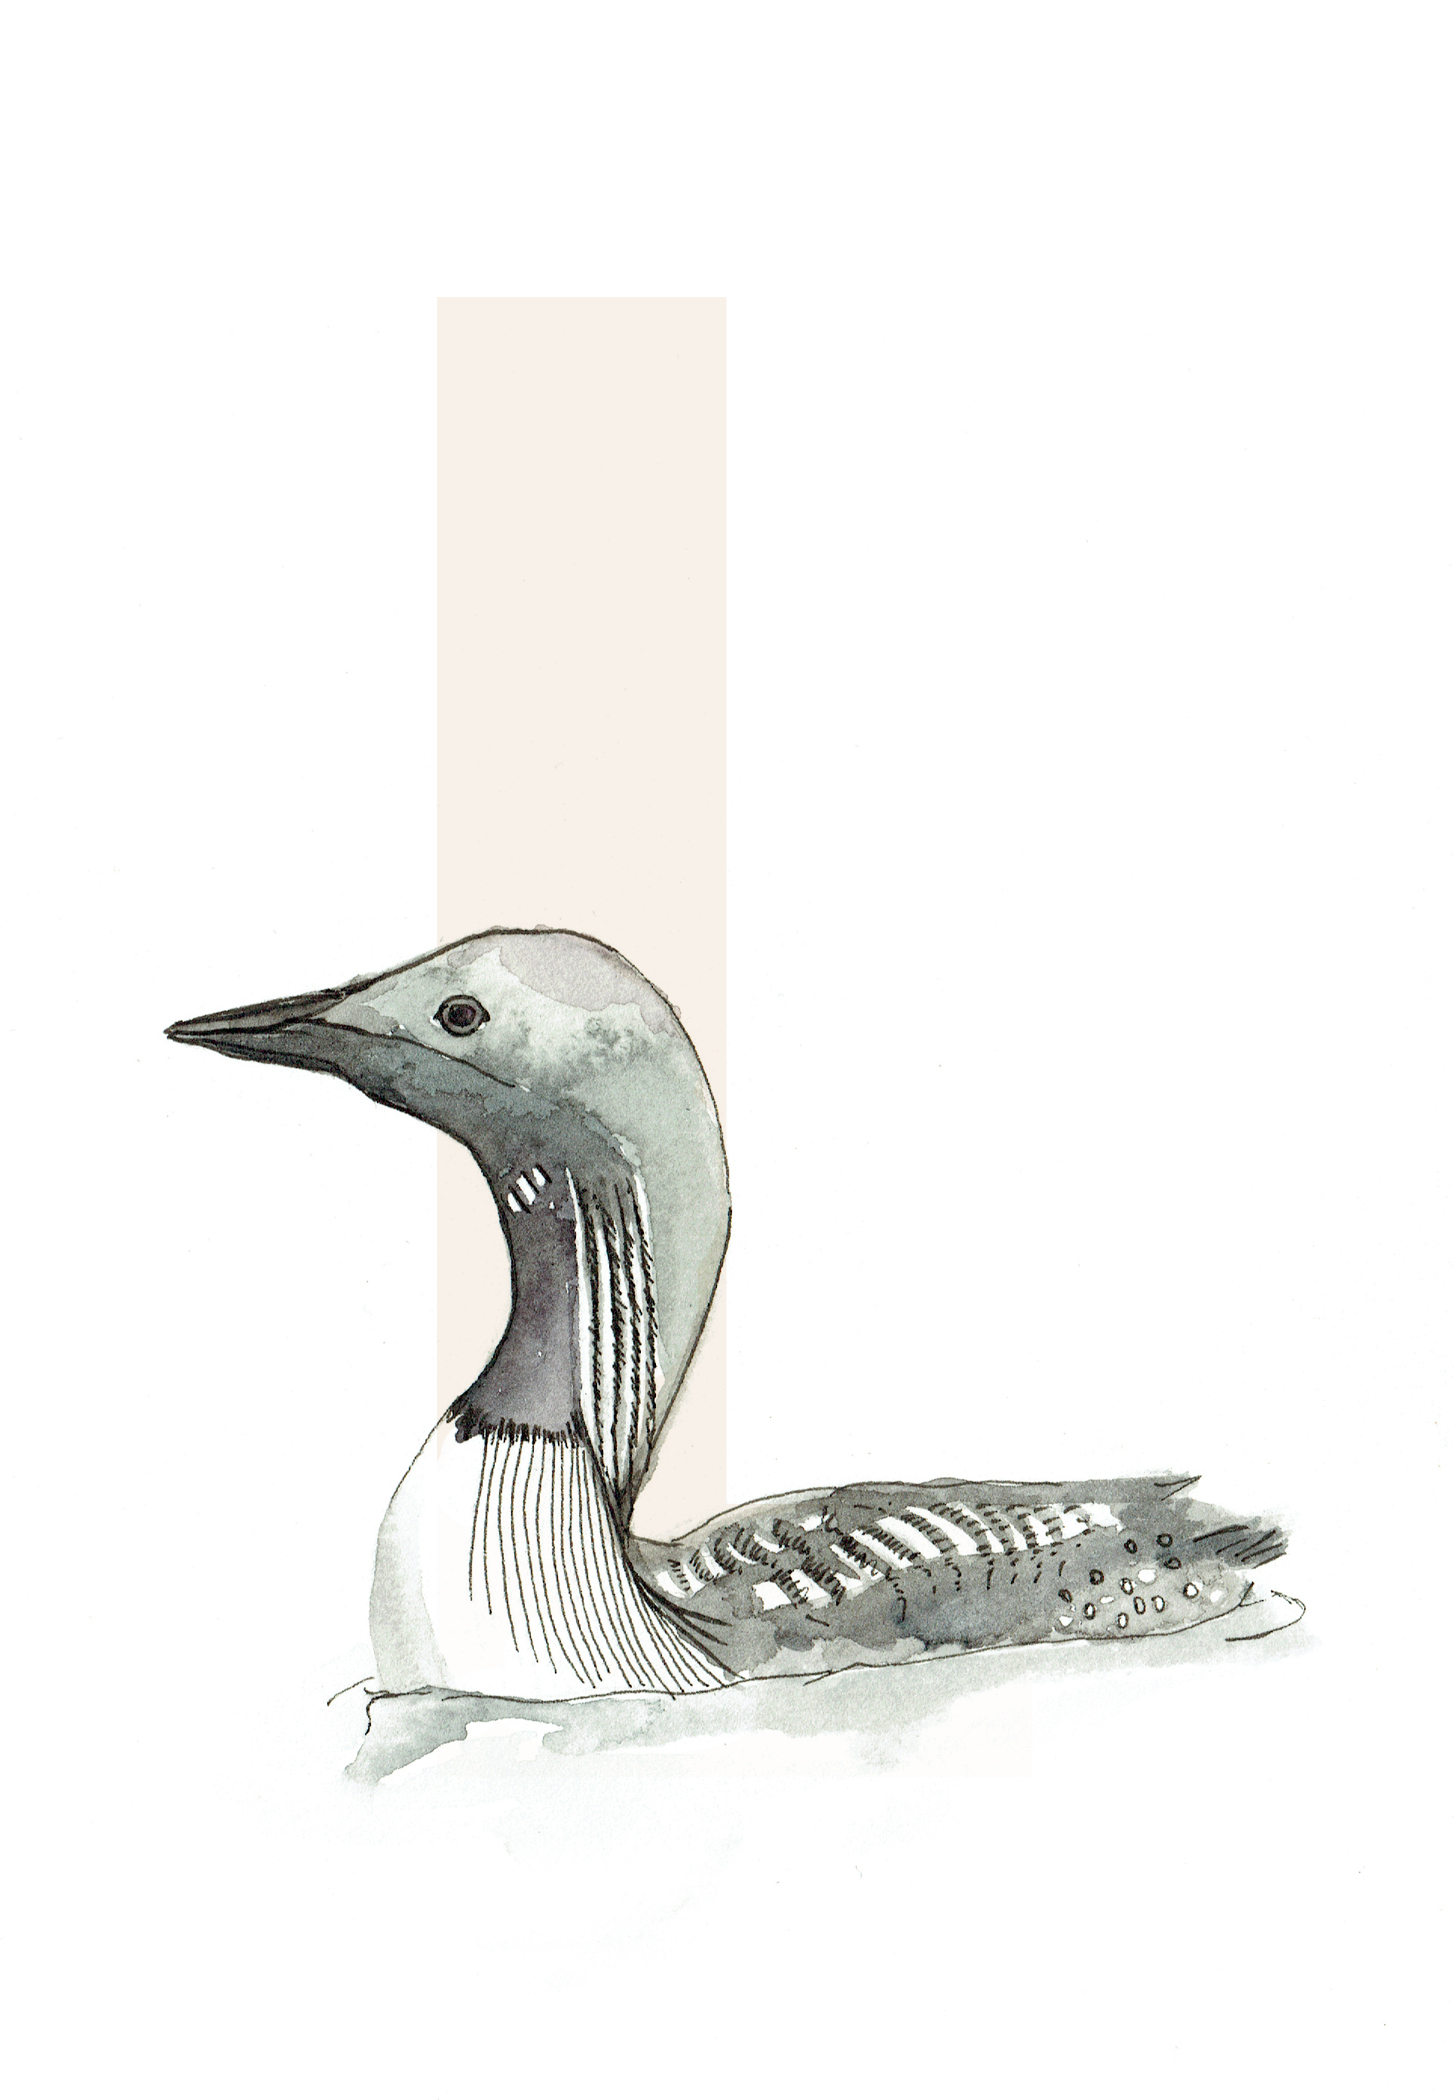 L is for Loon